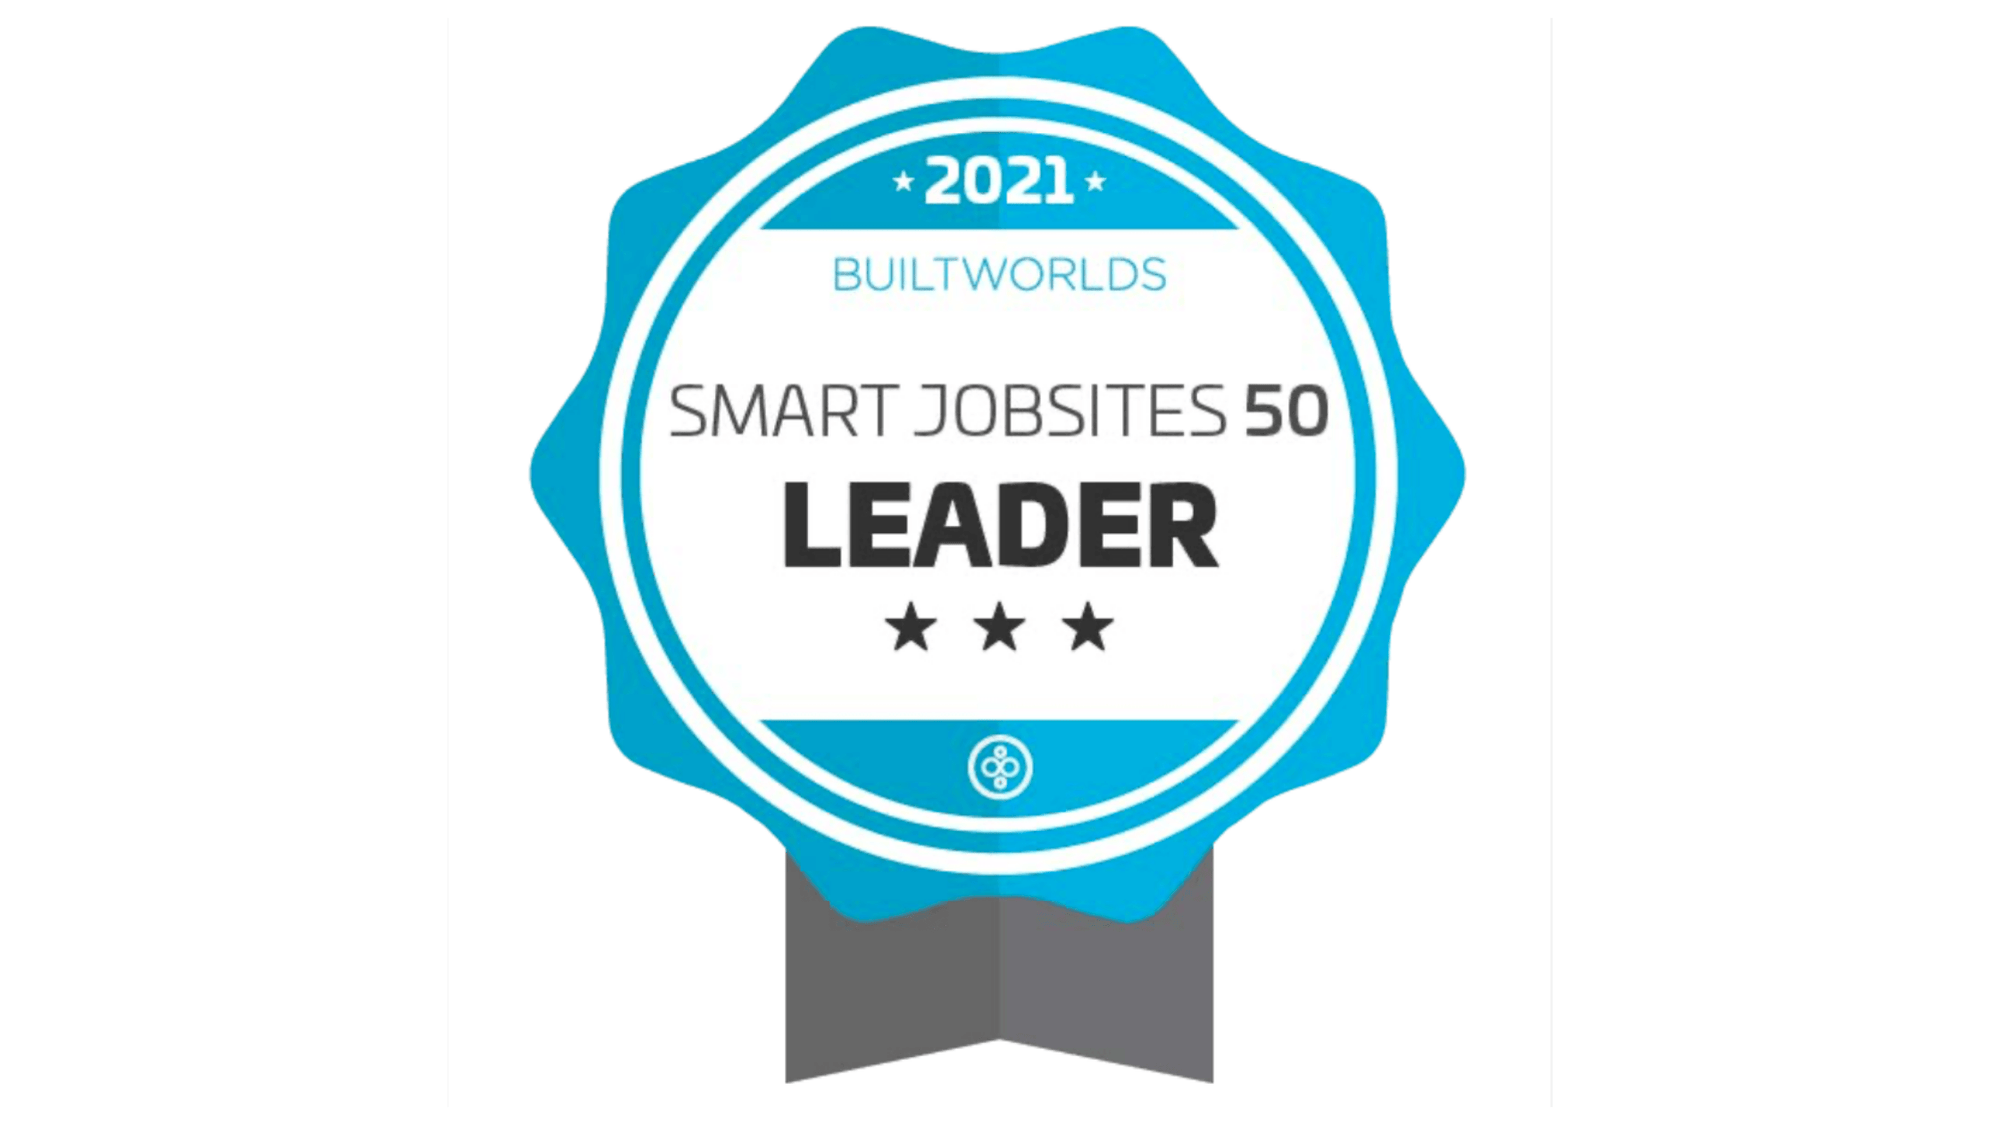 The Builtworlds 2021 Smart Jobsites 50 list Recognizes CamDo in the Jobsite Monitoring Category